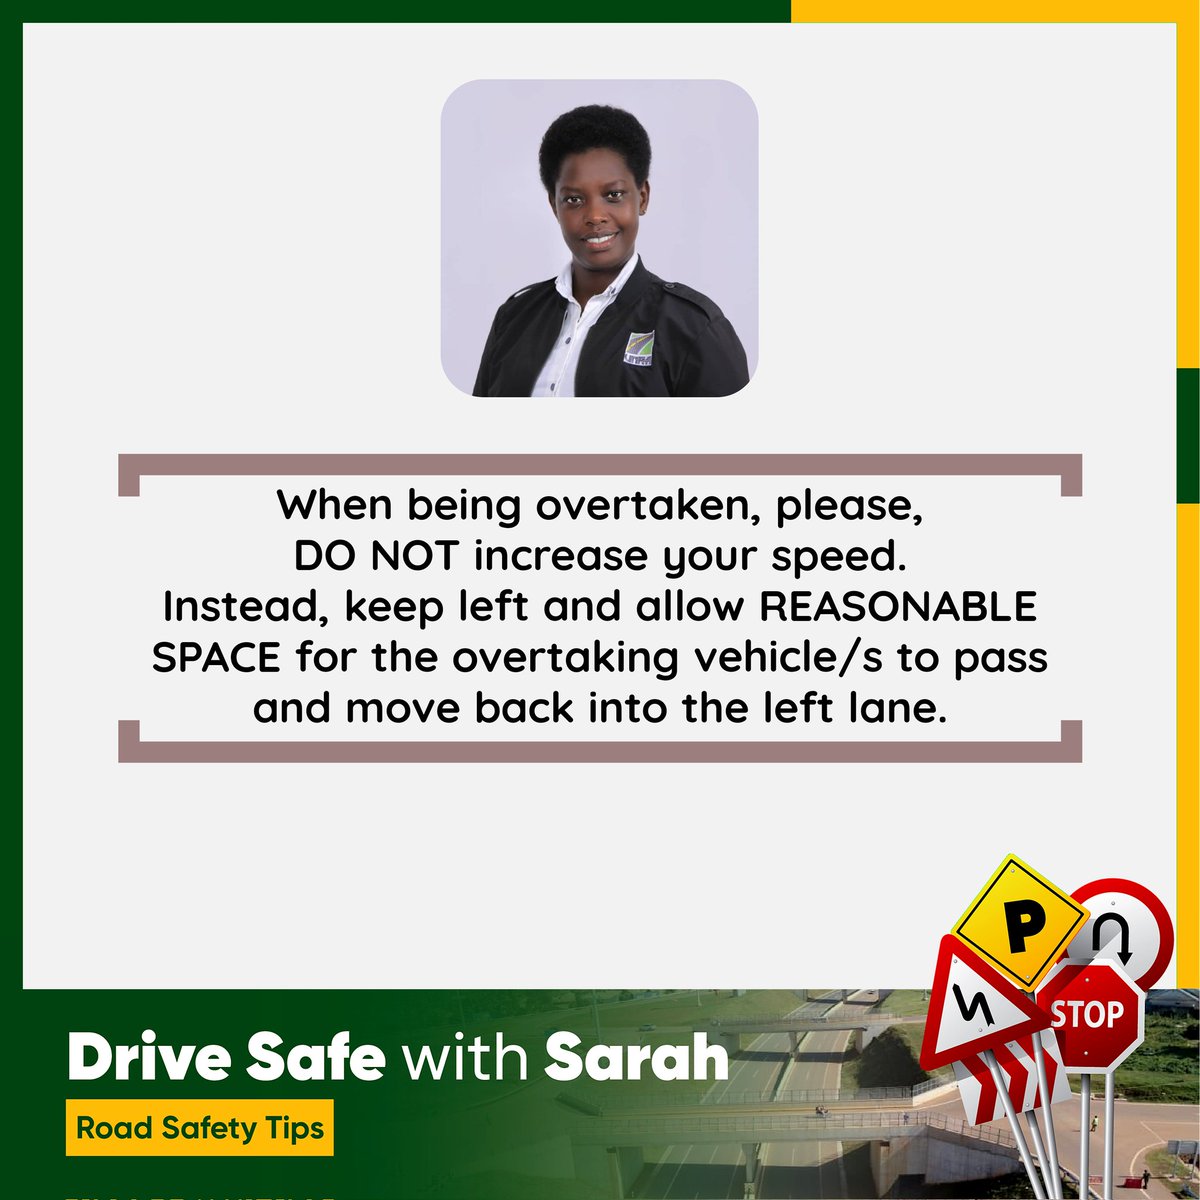 #RoadSafetyTips 
When being overtaken, please, 🚘 DO NOT increase your speed.  Instead, KEEP LEFT ↙️ and allow REASONABLE SPACE for the overtaking vehicle/s to pass and move back into the left lane.
#DriveSafeWithSarah